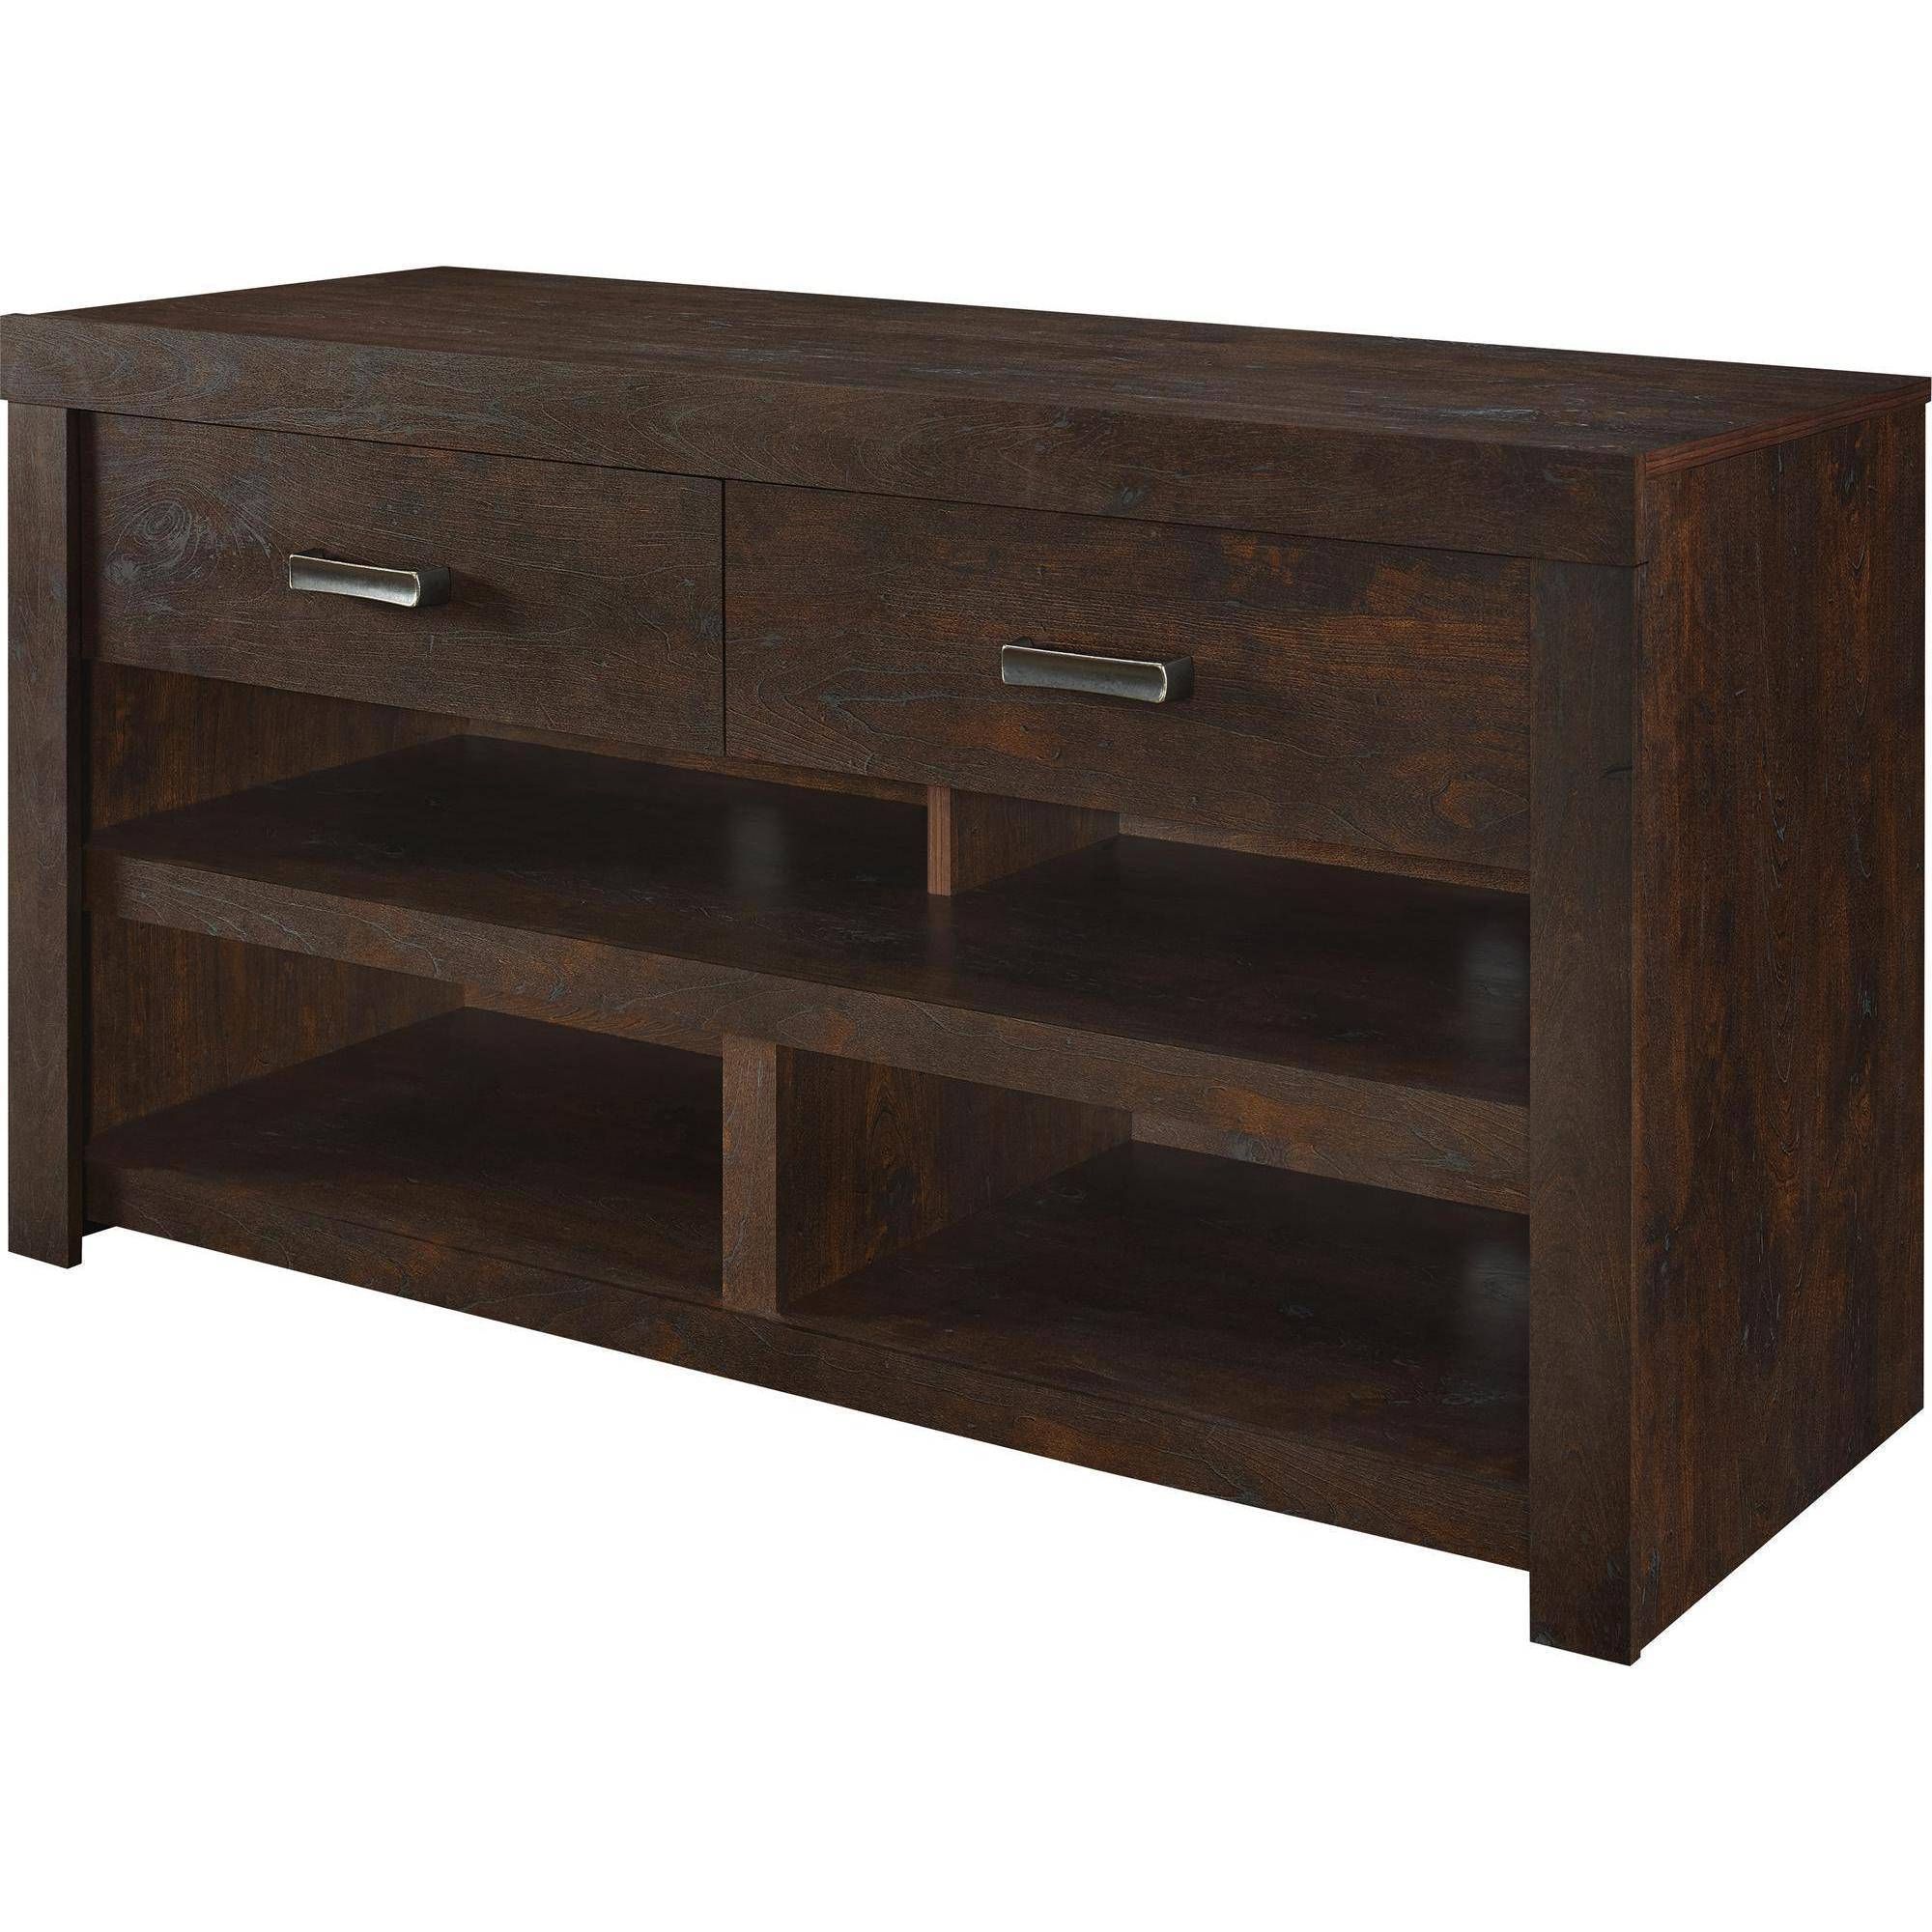 Tv Stands With Drawers And Shelves Throughout Recent Altra Westbrook 42" Tv Stand, Dark Walnut – Walmart (View 6 of 20)